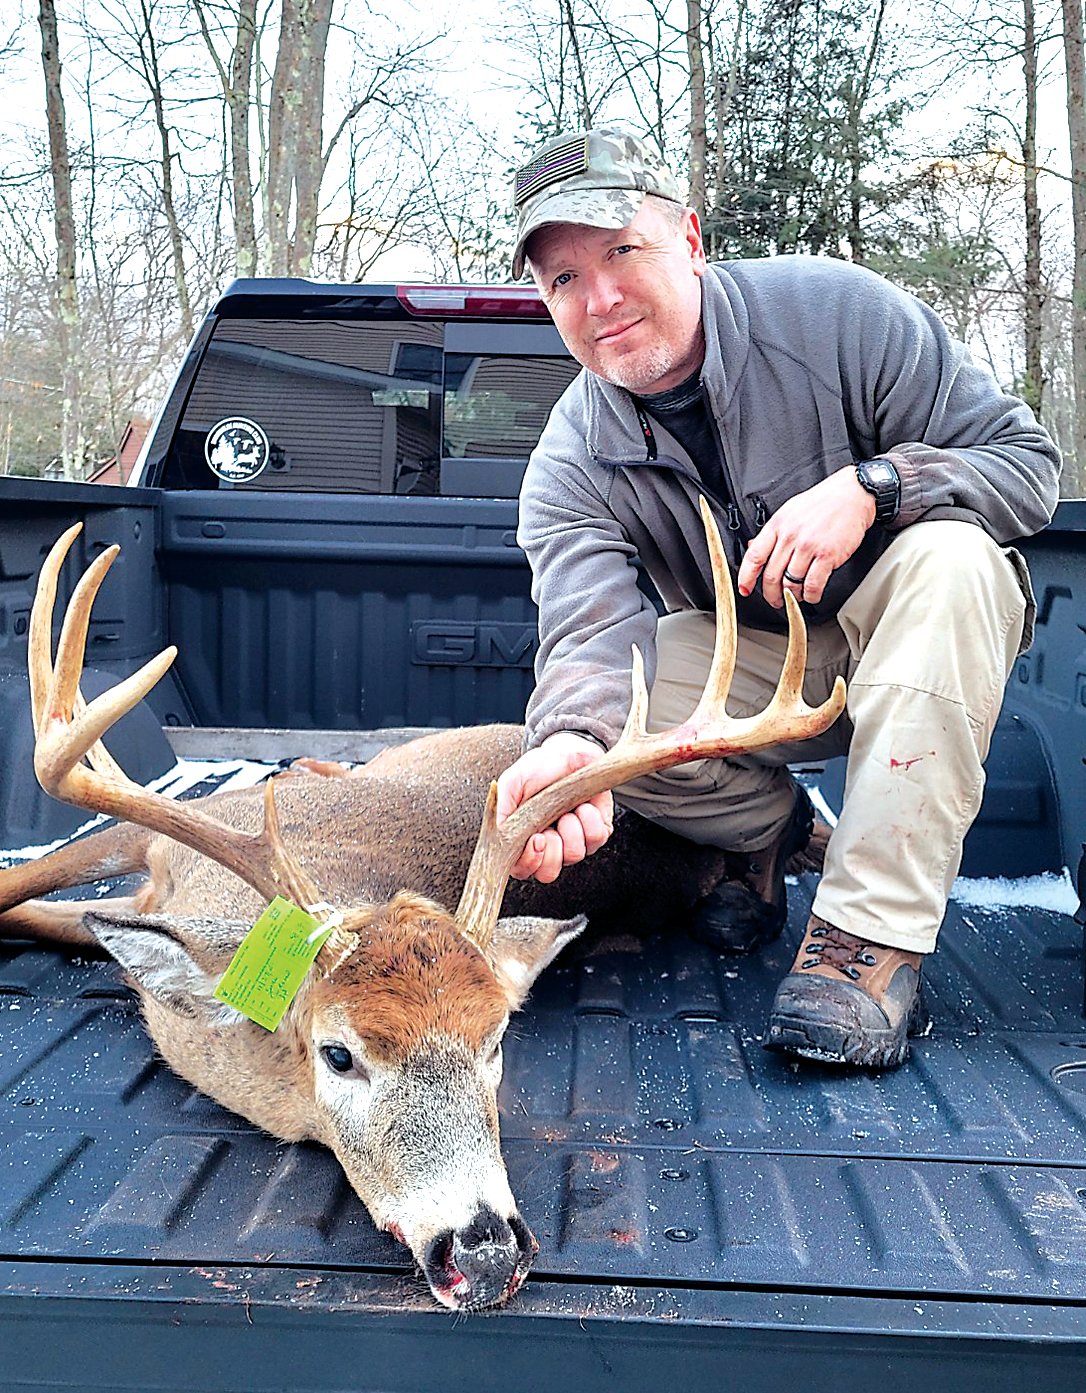 Mike Park bagged this impressive 10-pointer, which sported a 21.5-inch spread and scored 76 to take over third place in the Sullivan County Democrat/FOSCOSC Big Buck Contest.